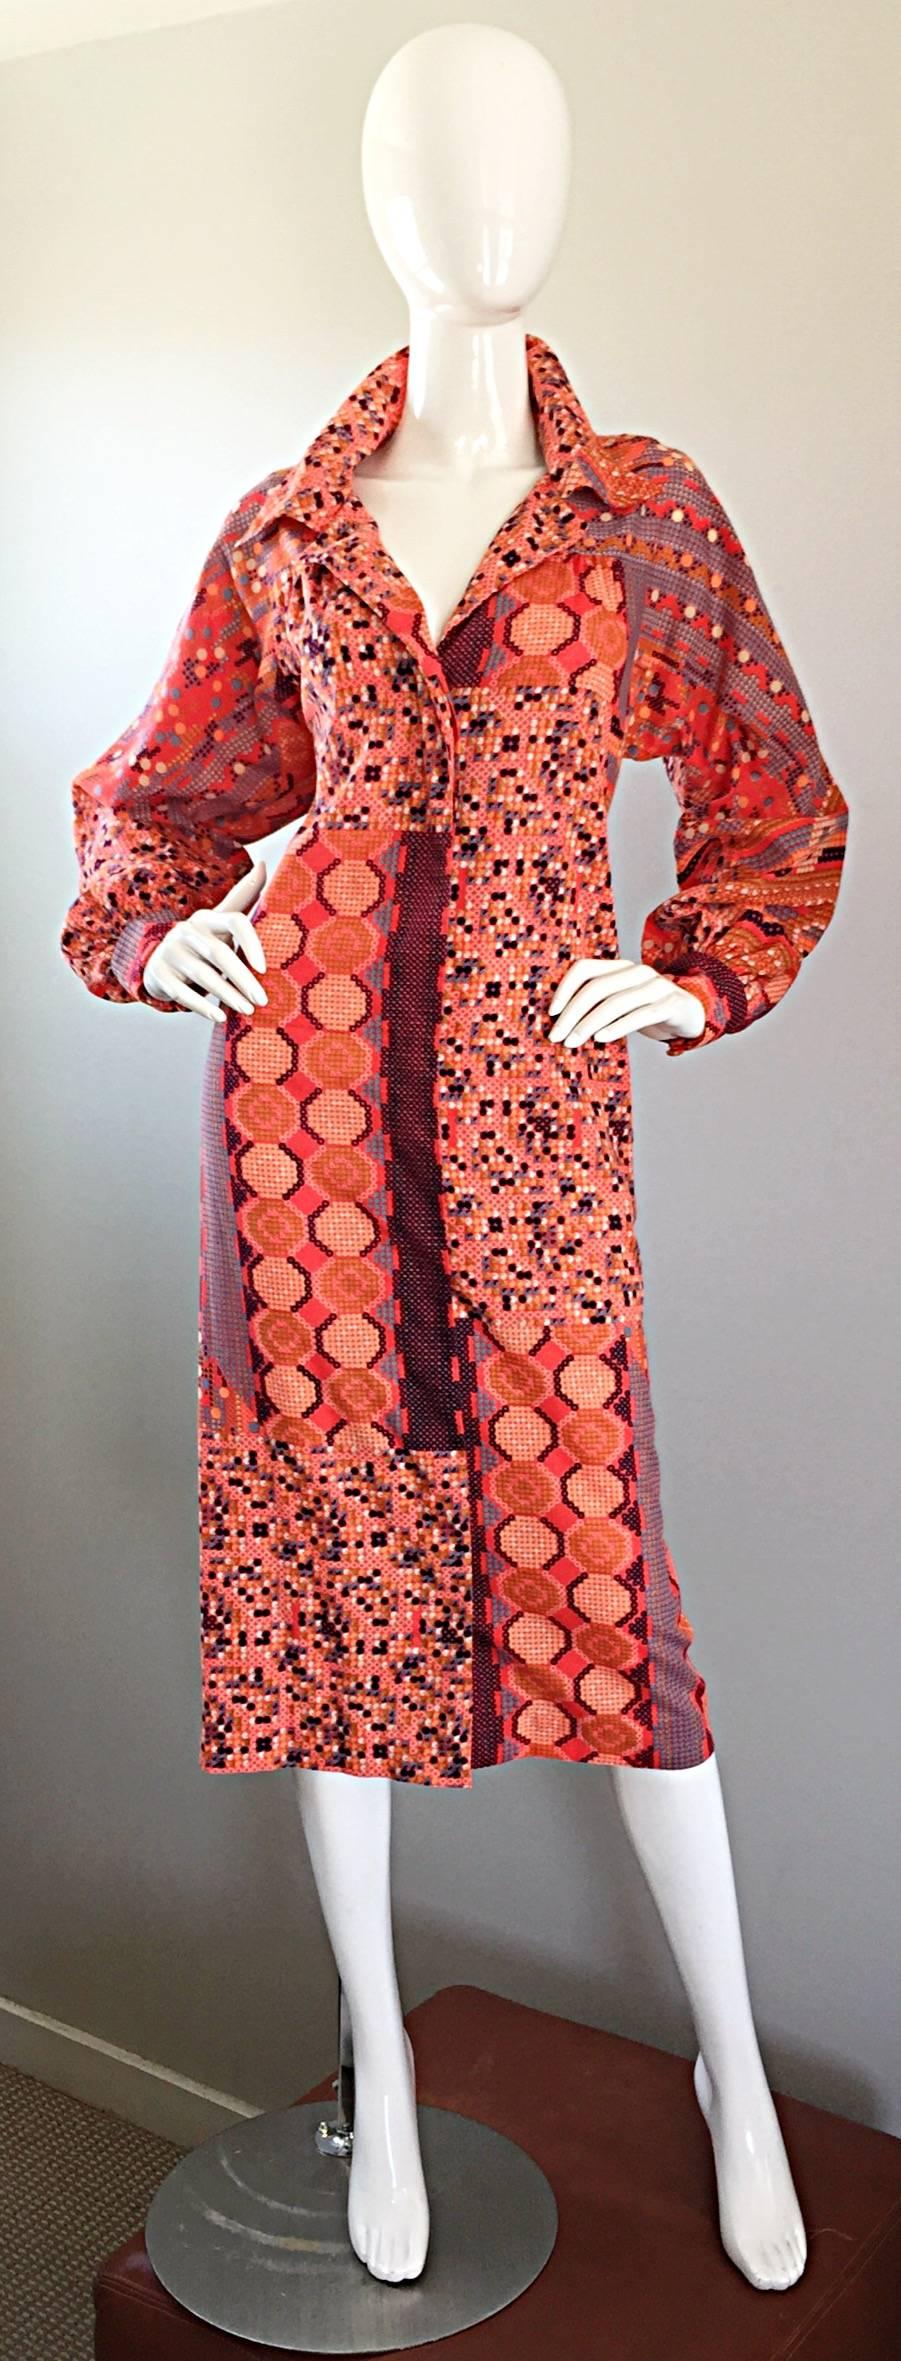 Delightful 1970s JAY MORLEY for FERN VIOLLETTE 'Tetris' printed dress! Features vibrant colors in multi geometric mosaic prints throughout. Buttons up the front, with a collar and two sleeve cuffs that button at the wrist. Jay Morley was a mid